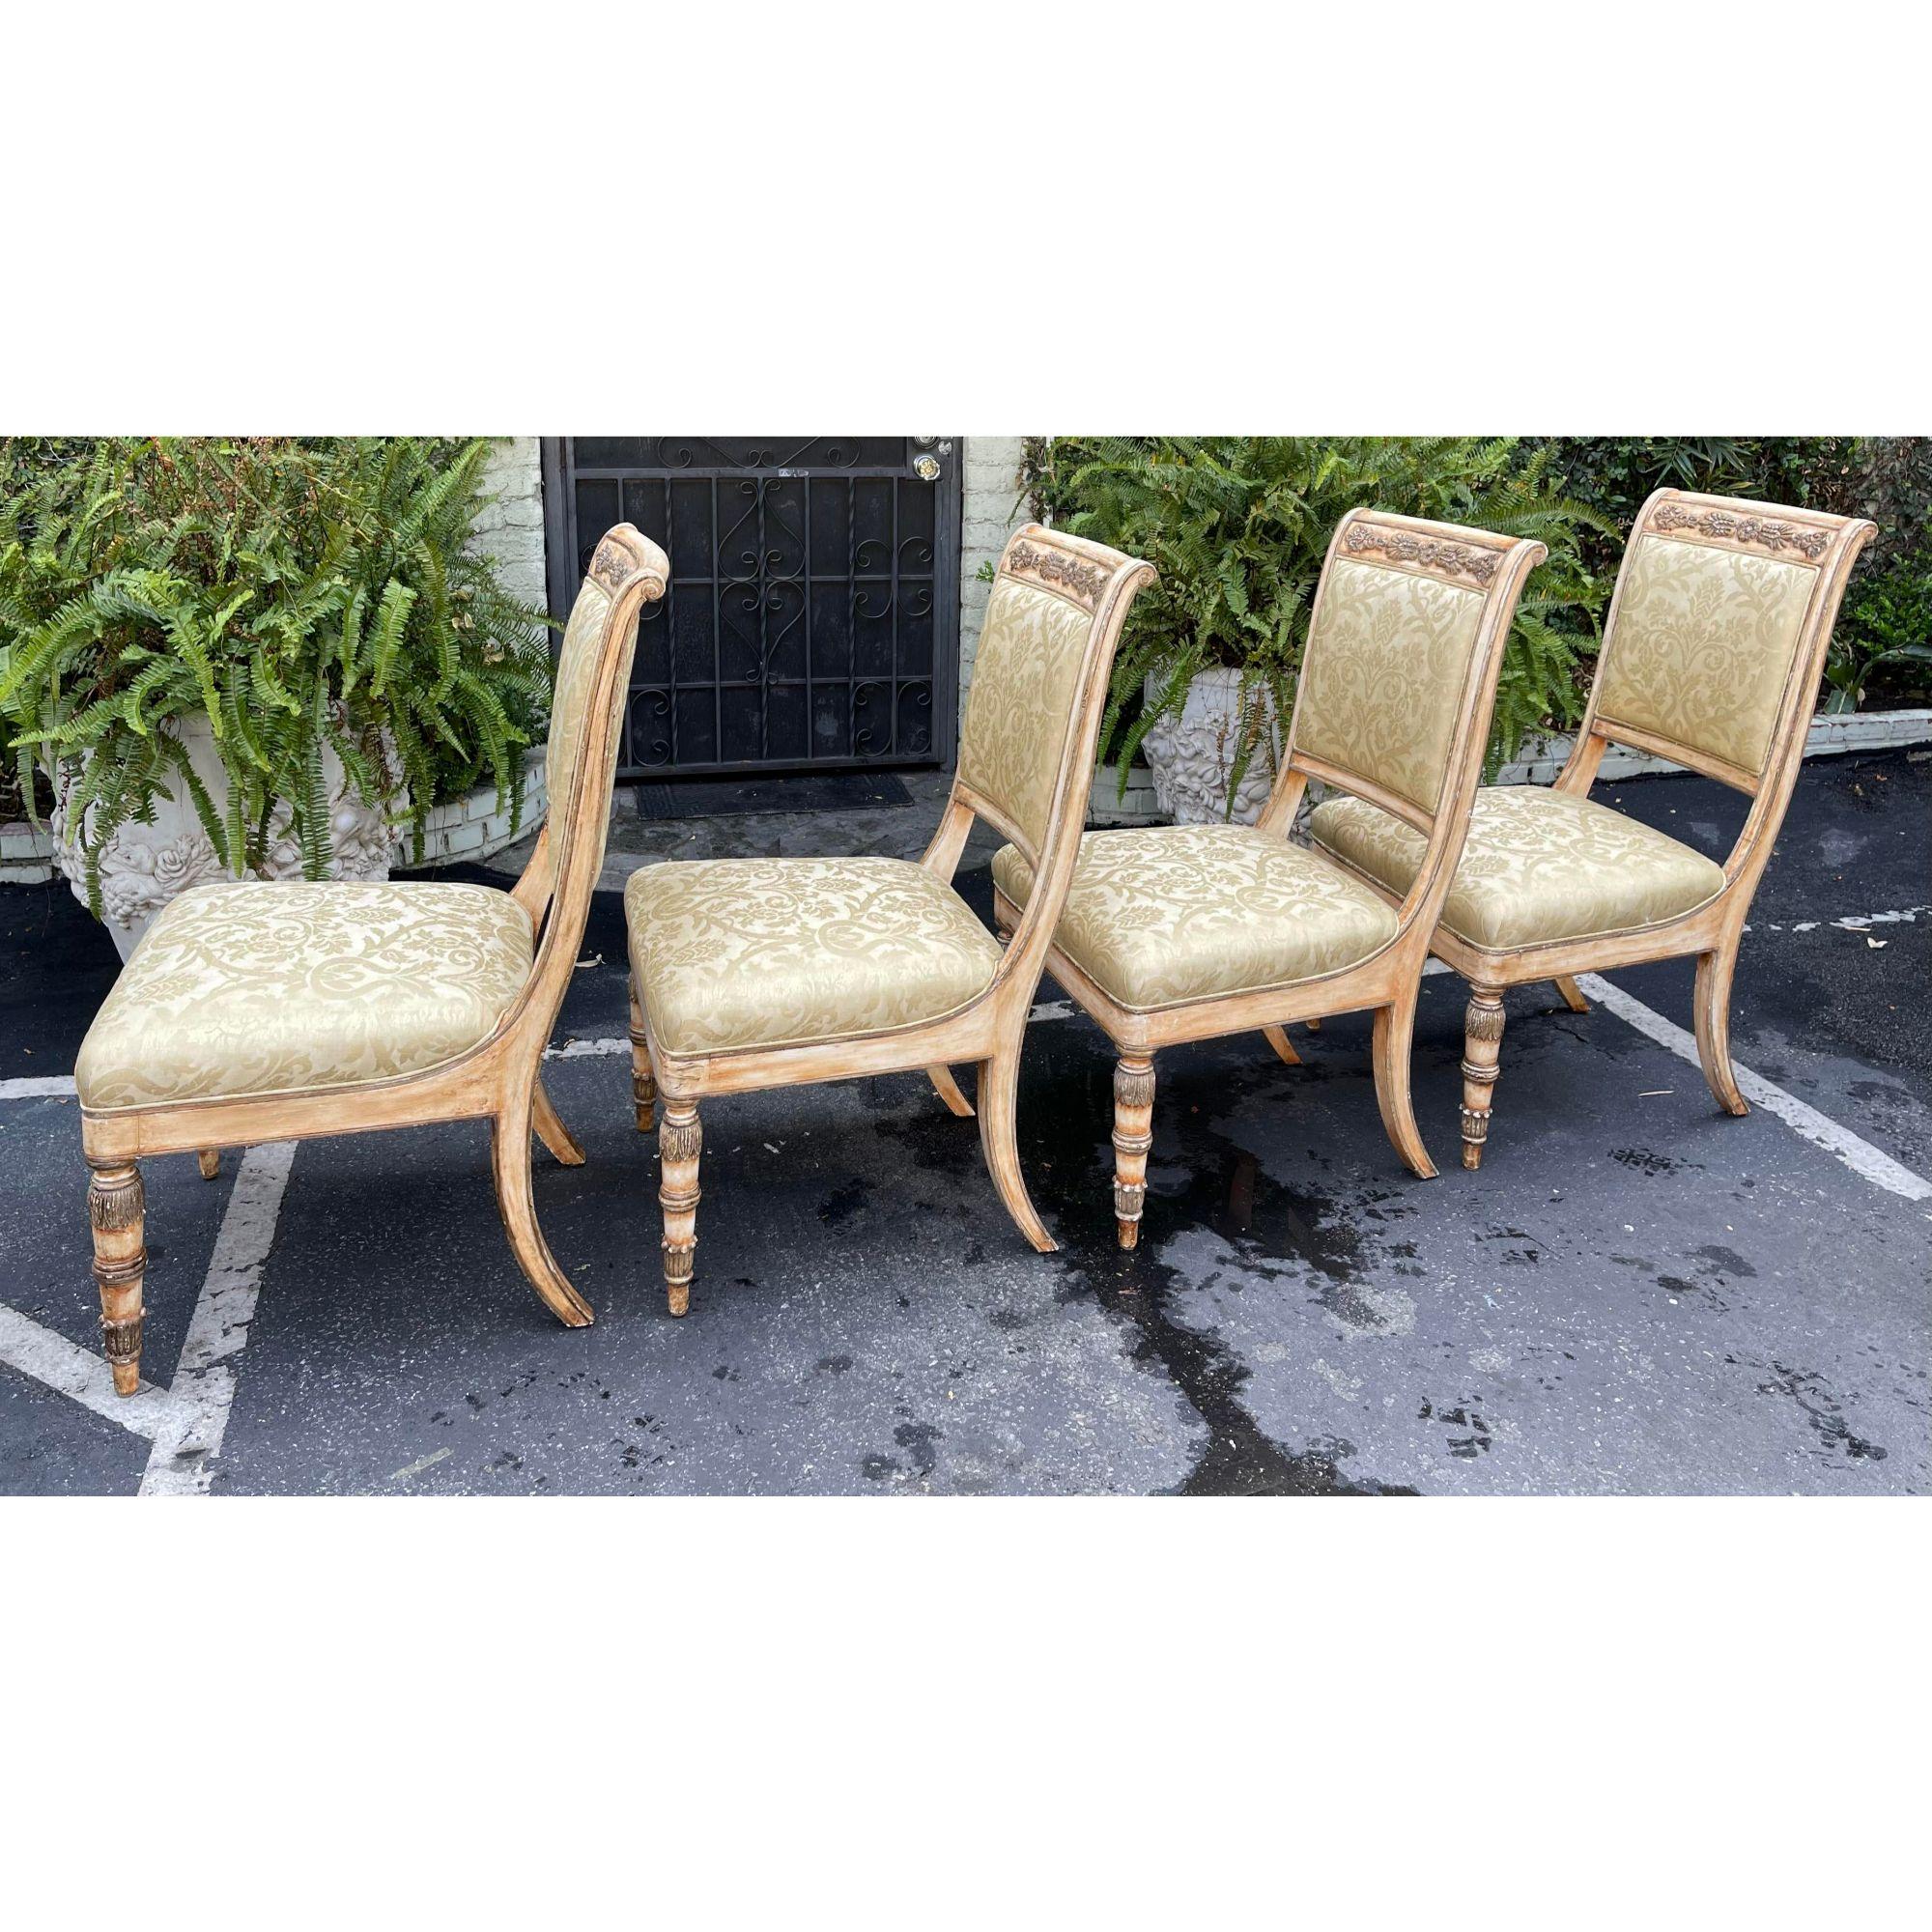 Louis XVI Set of 4, 19th C Style Charles Pollock Russian Imperial Dining Chairs For Sale